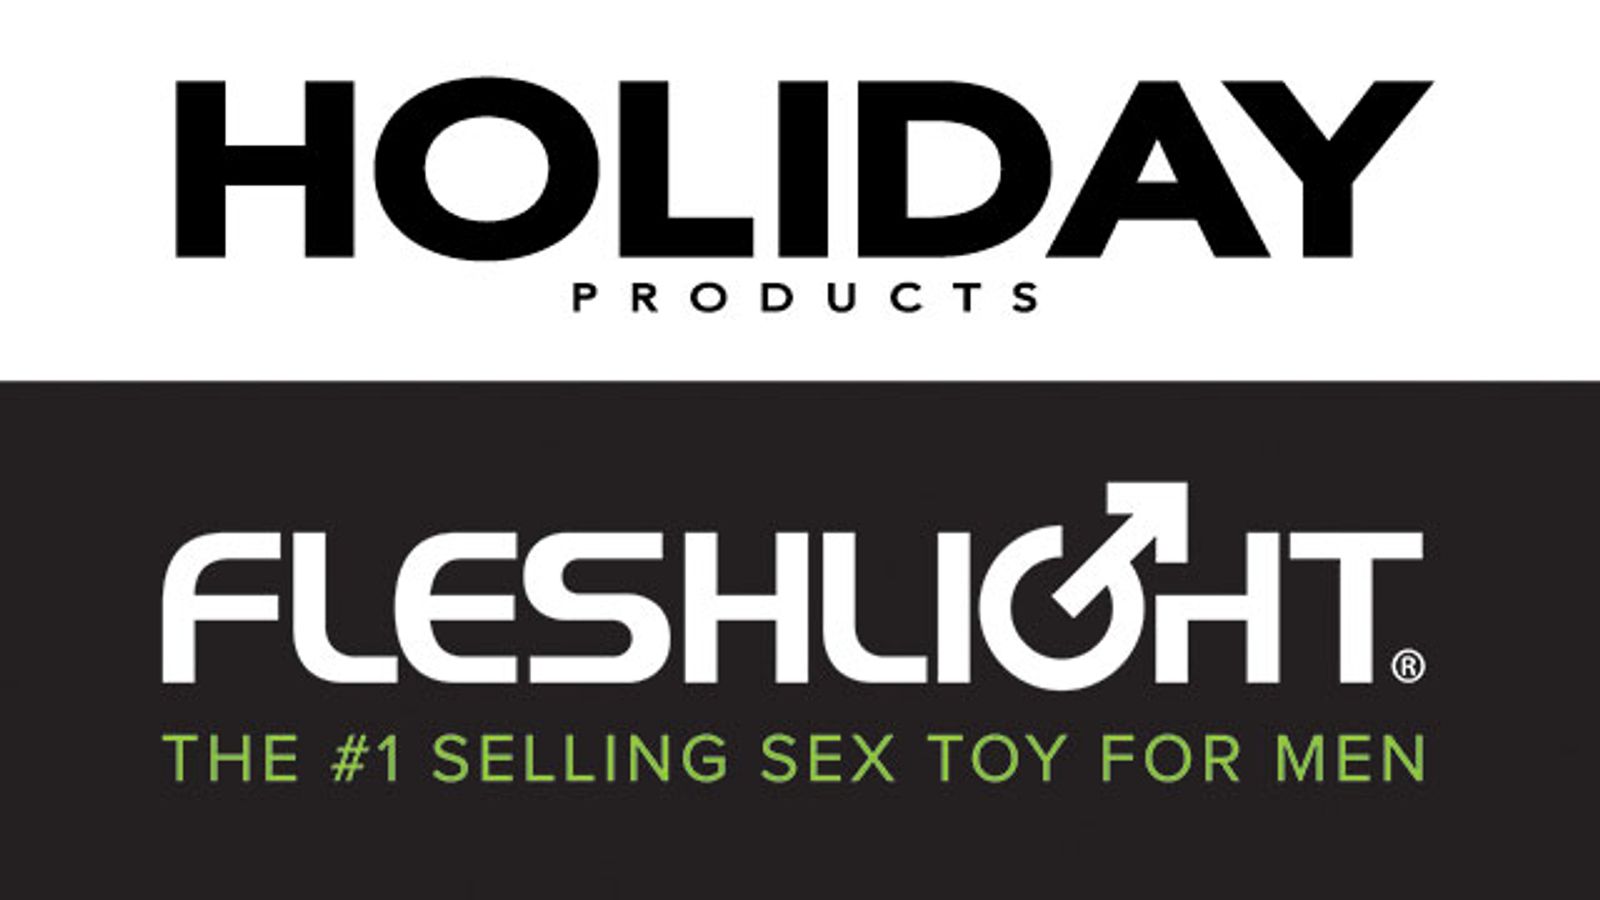 interactive Life Forms Inks Deal with Holiday Products for Fleshlight Distribution